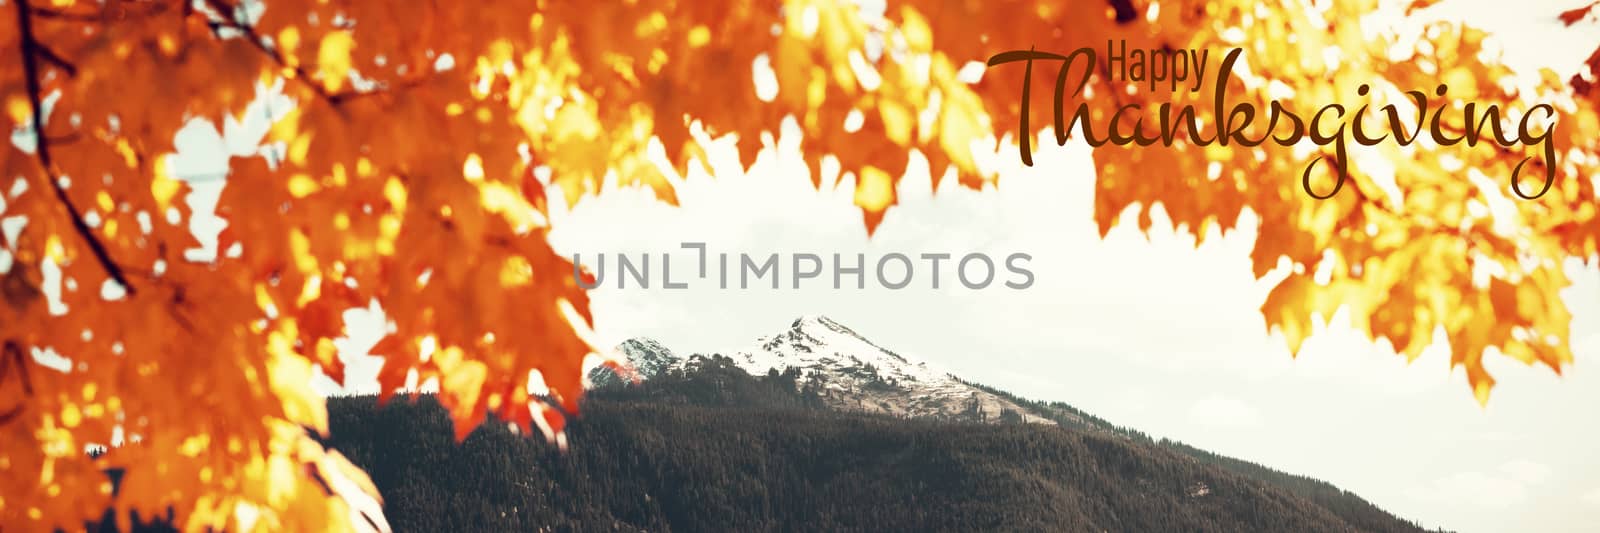 Illustration of happy thanksgiving day text greeting against leaves and snow capped mountain